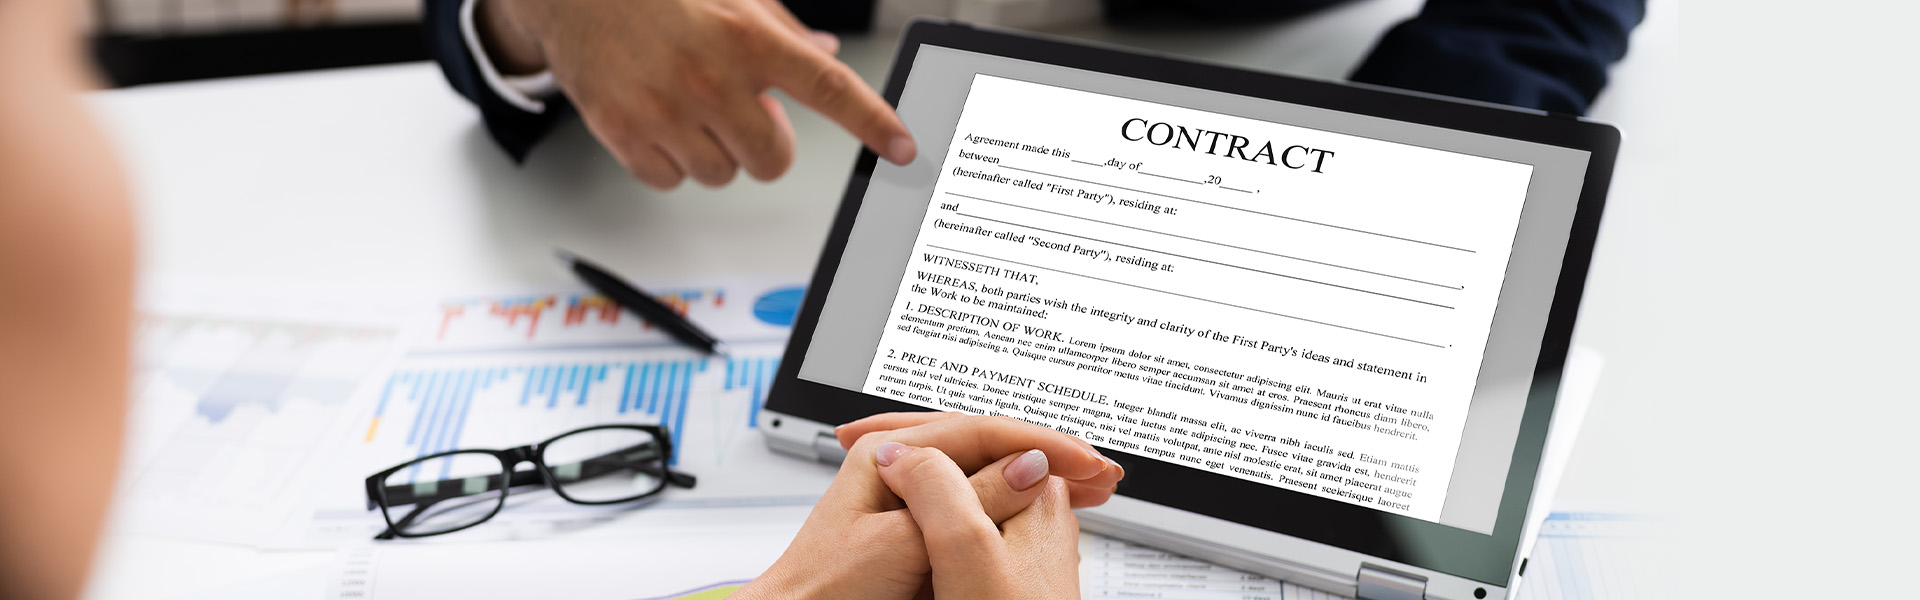 eSign Contracts for Lowering Risk.